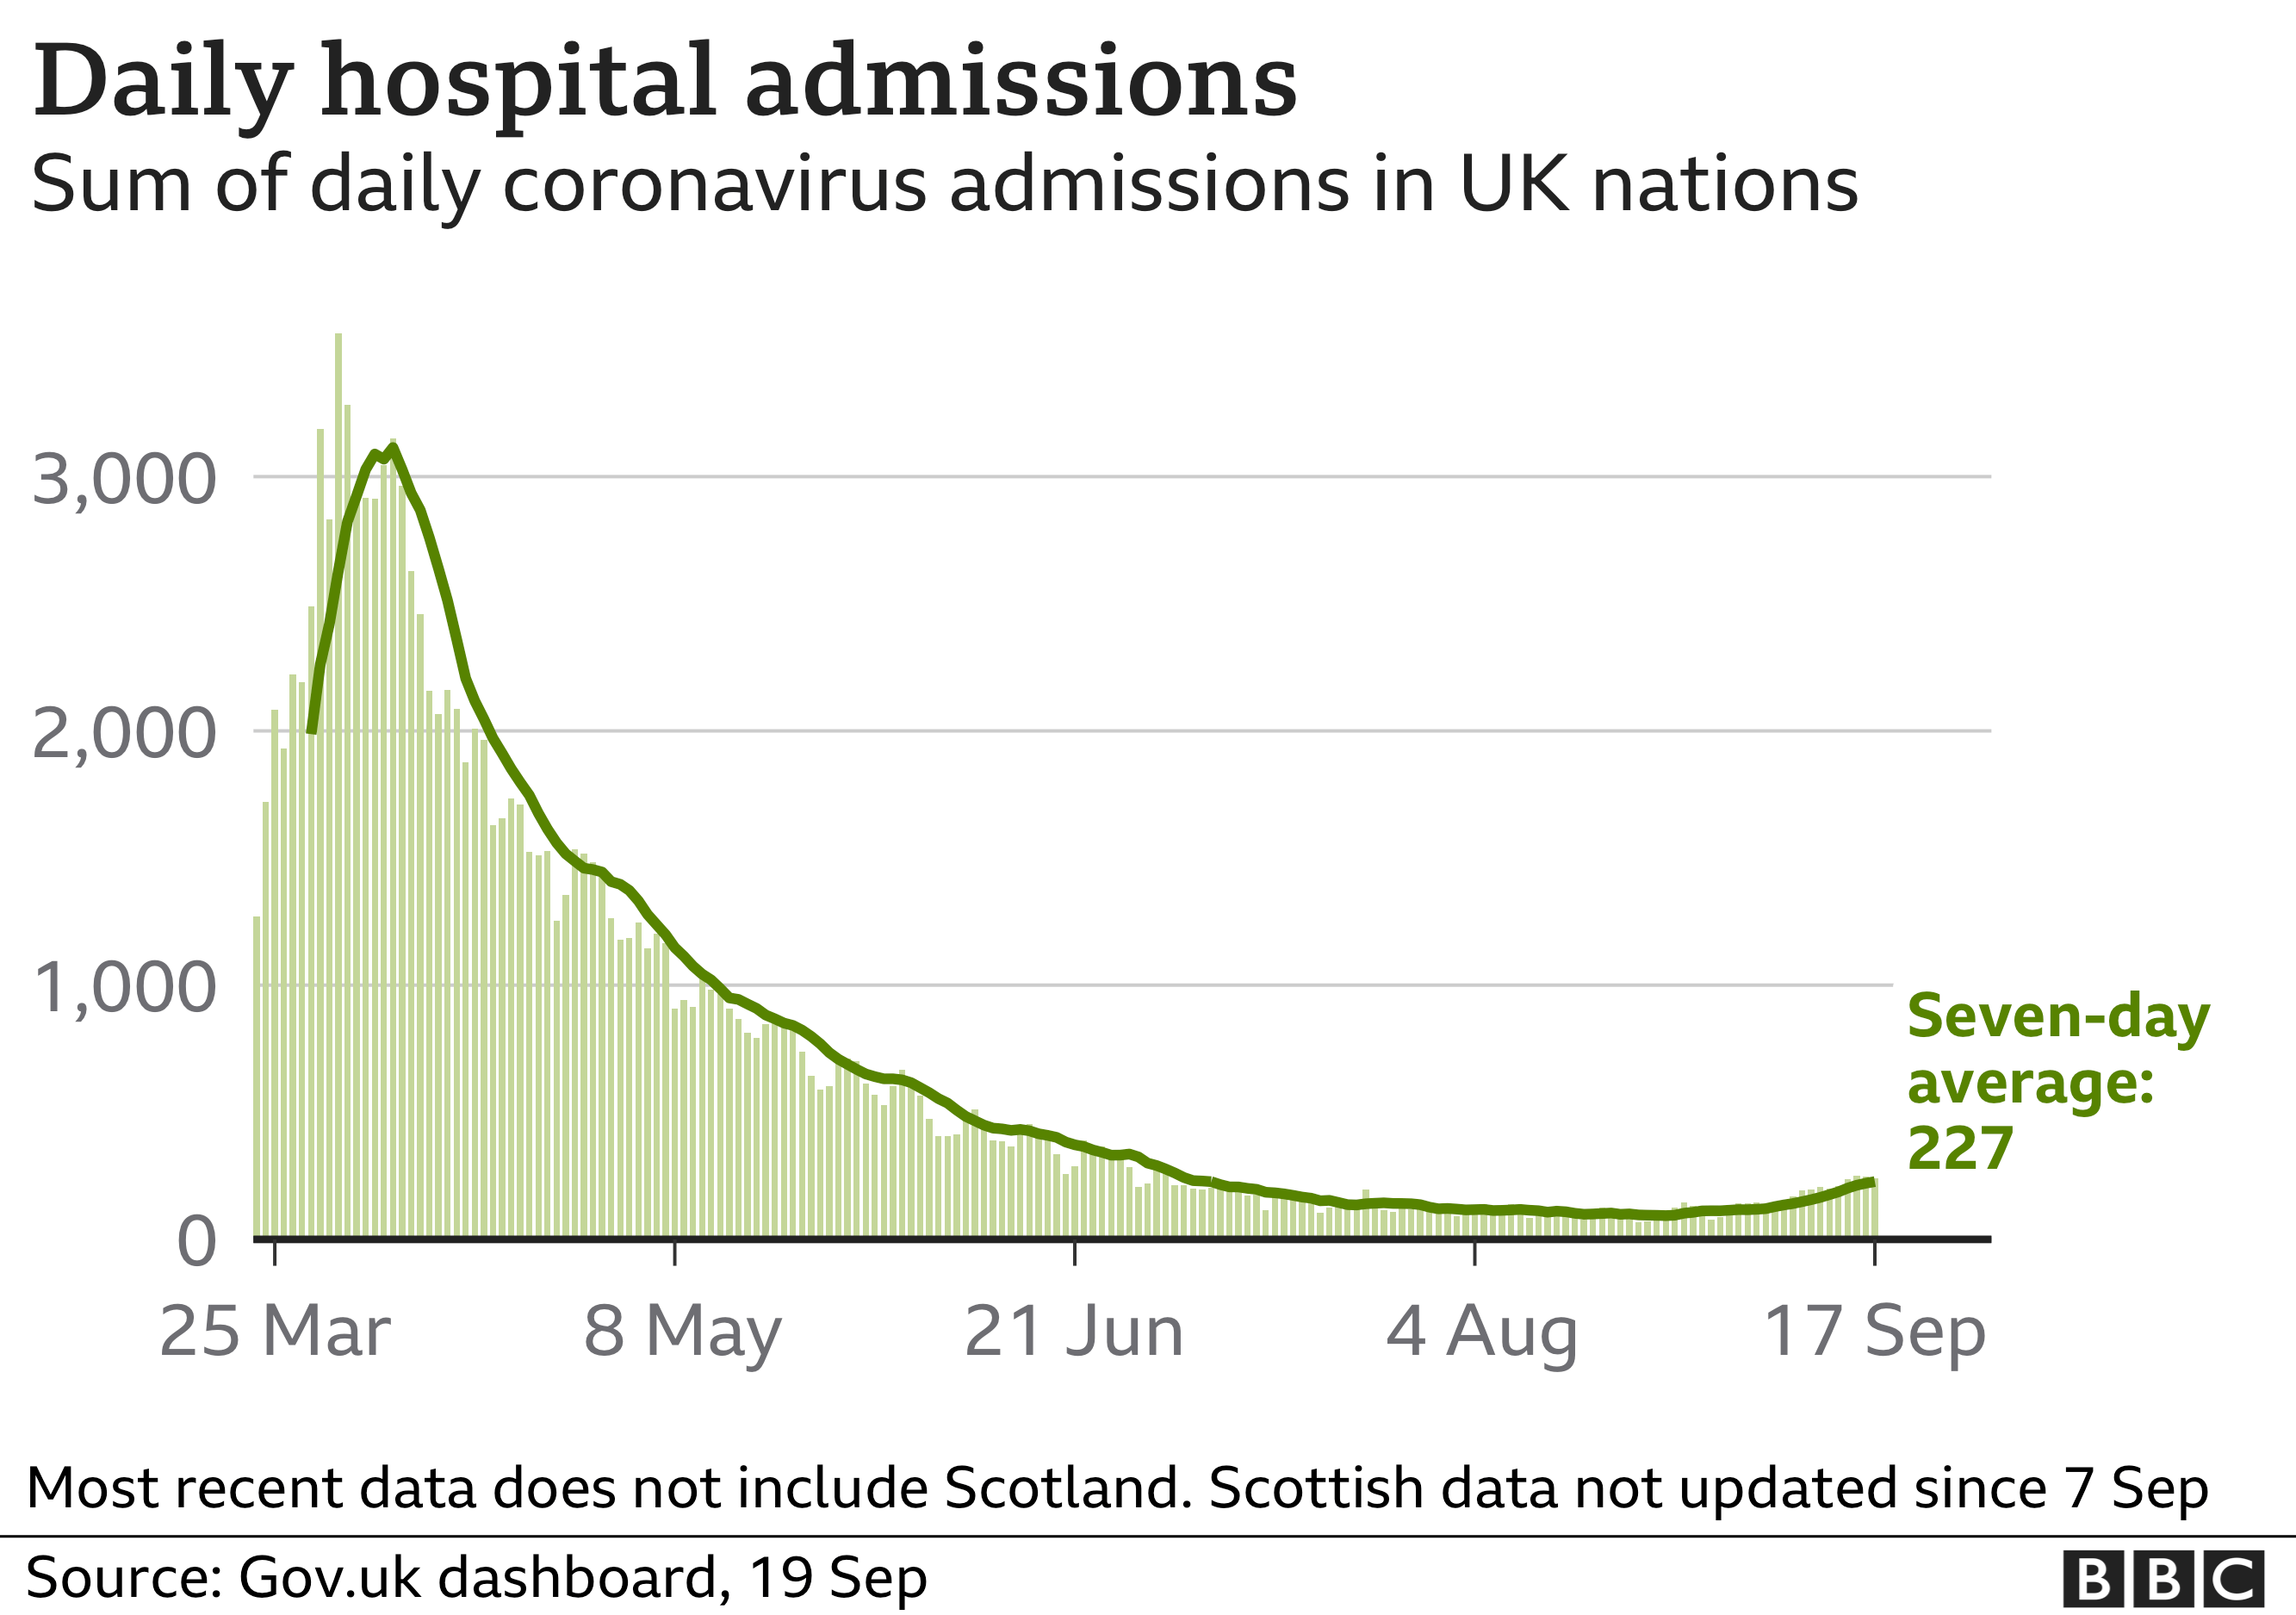 Graph showing daily hospital admissions